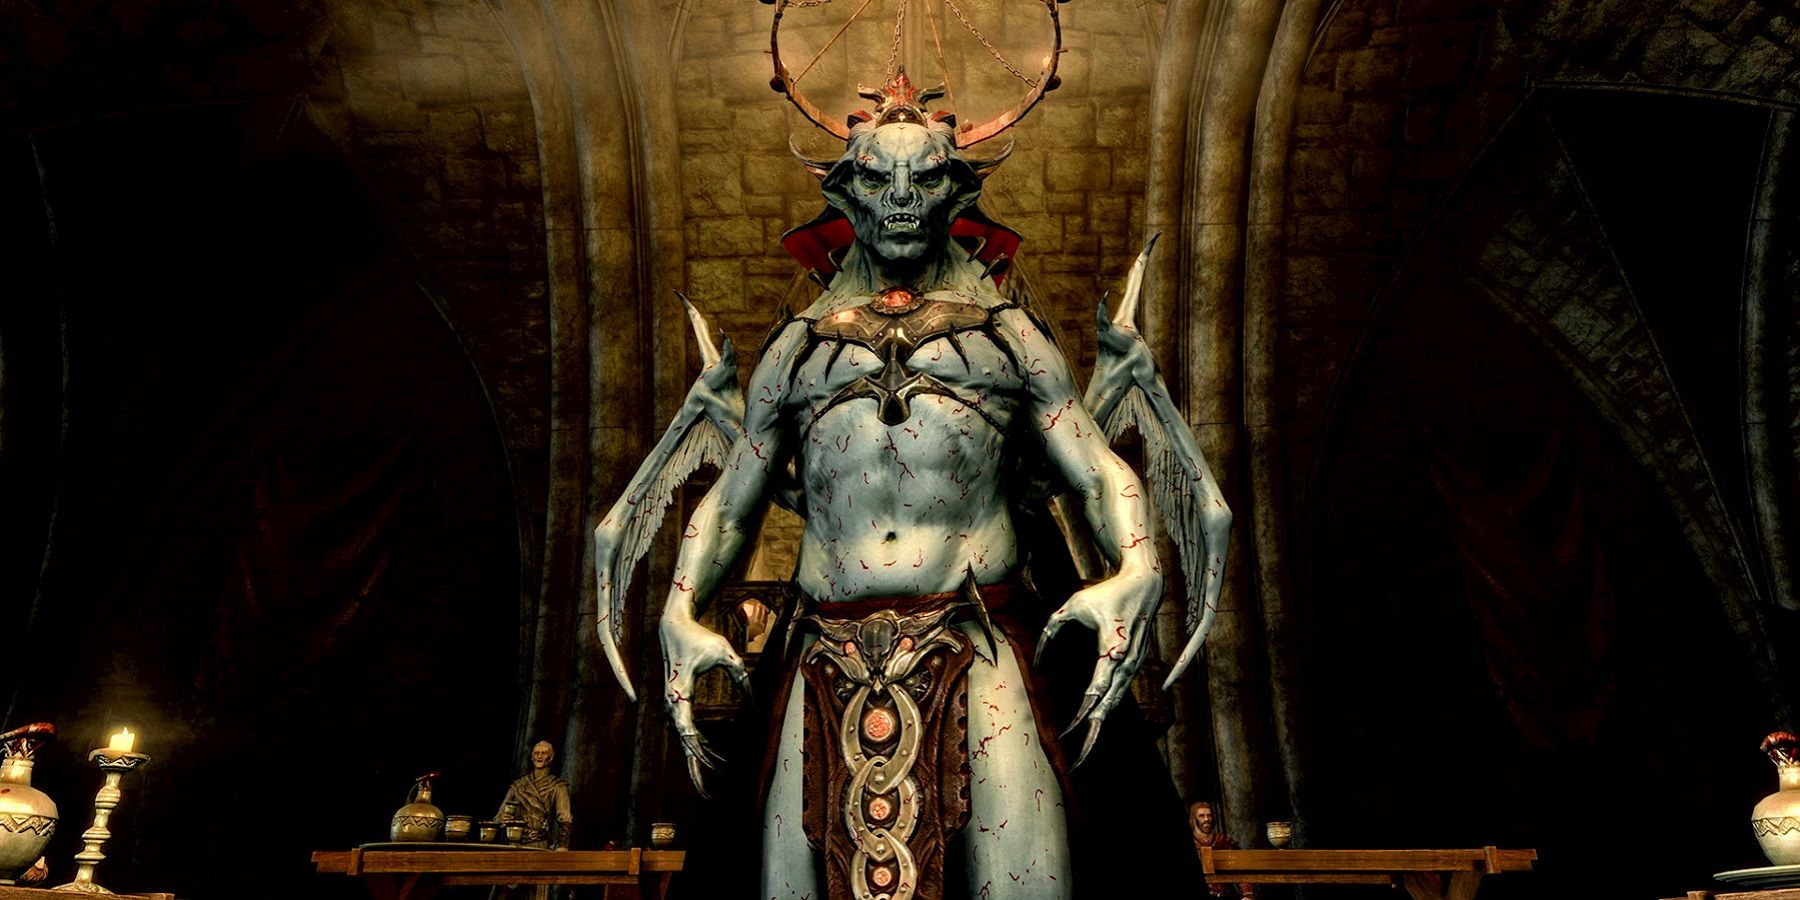 Image of a Vampire Lord from Skyrim.